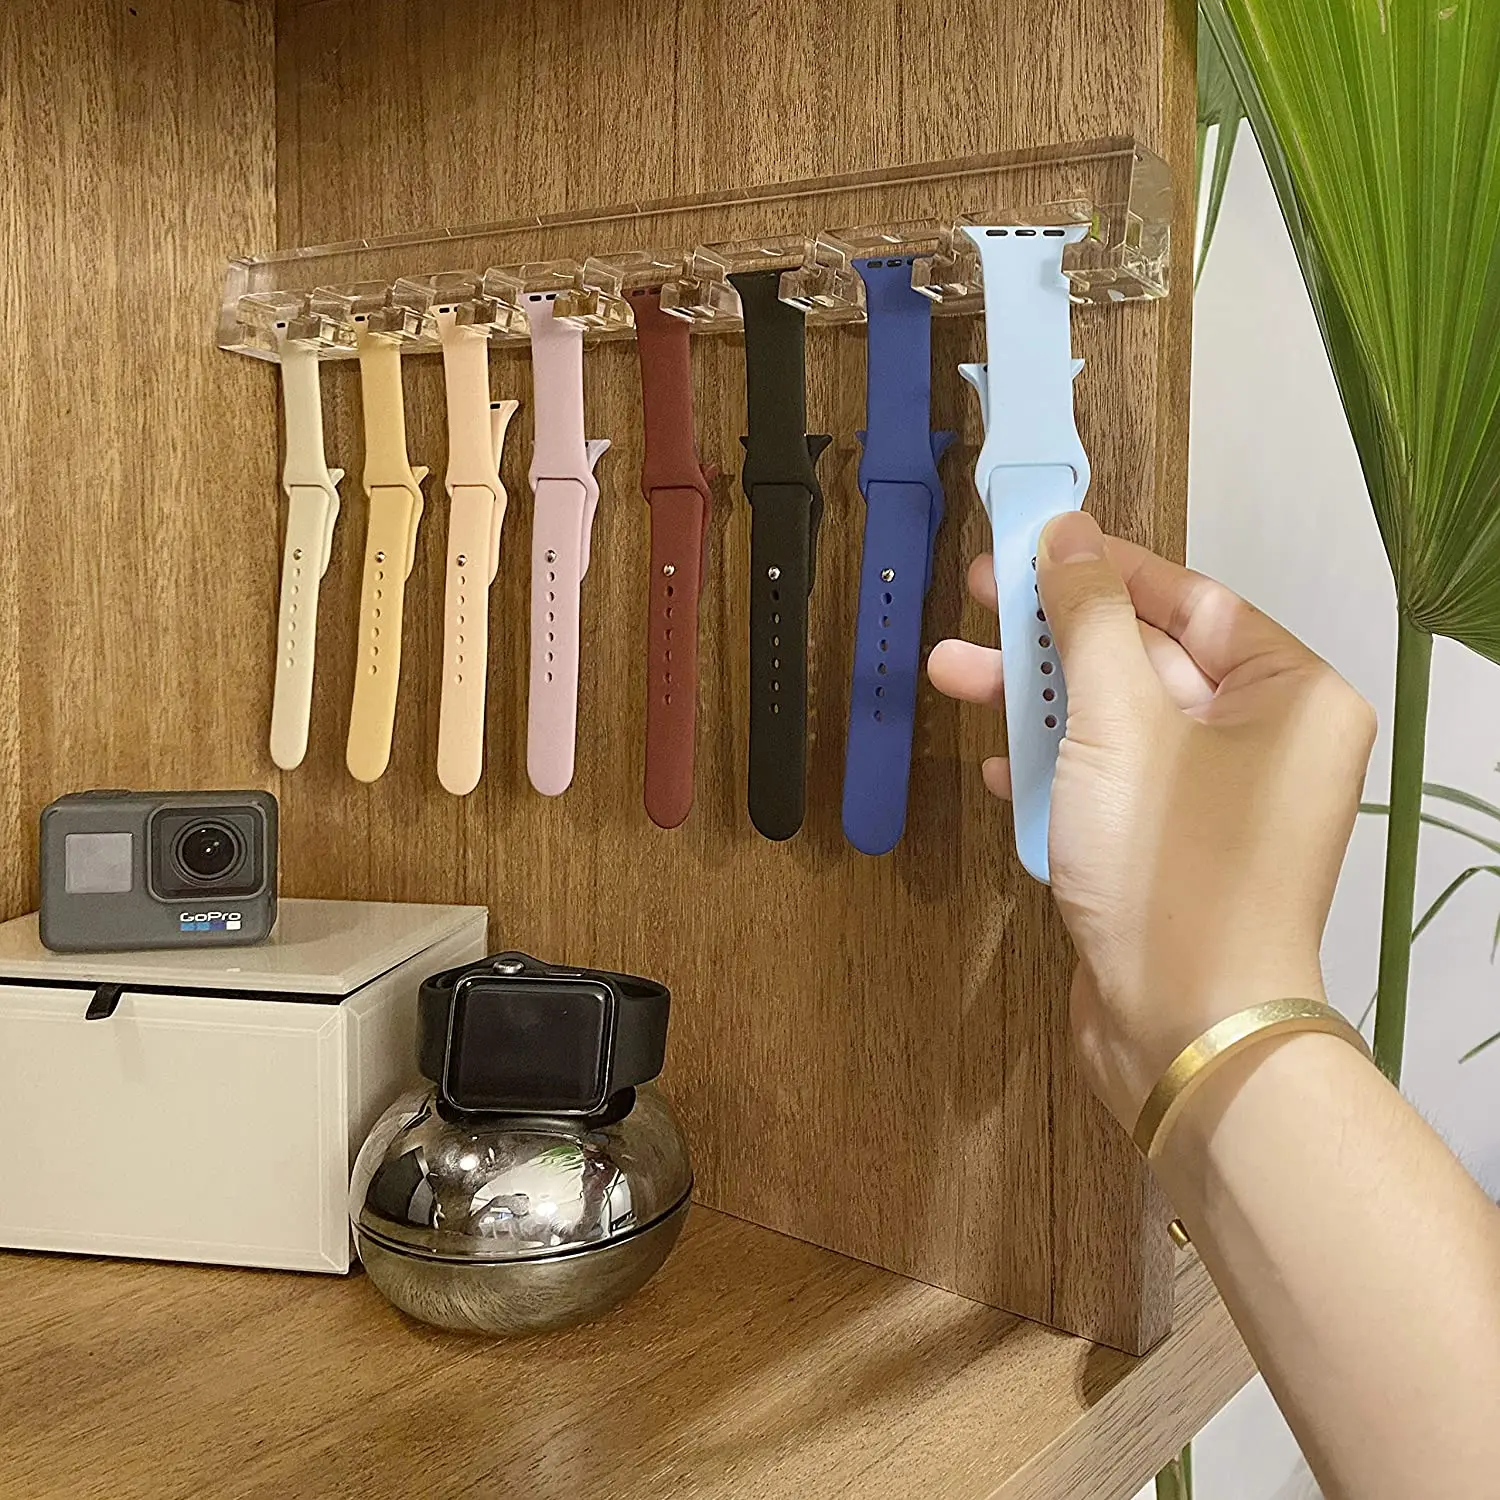 Source Watch Holder for Watch Acrylic Smartwatch Band Wall Display Rack (Clear) m.alibaba.com